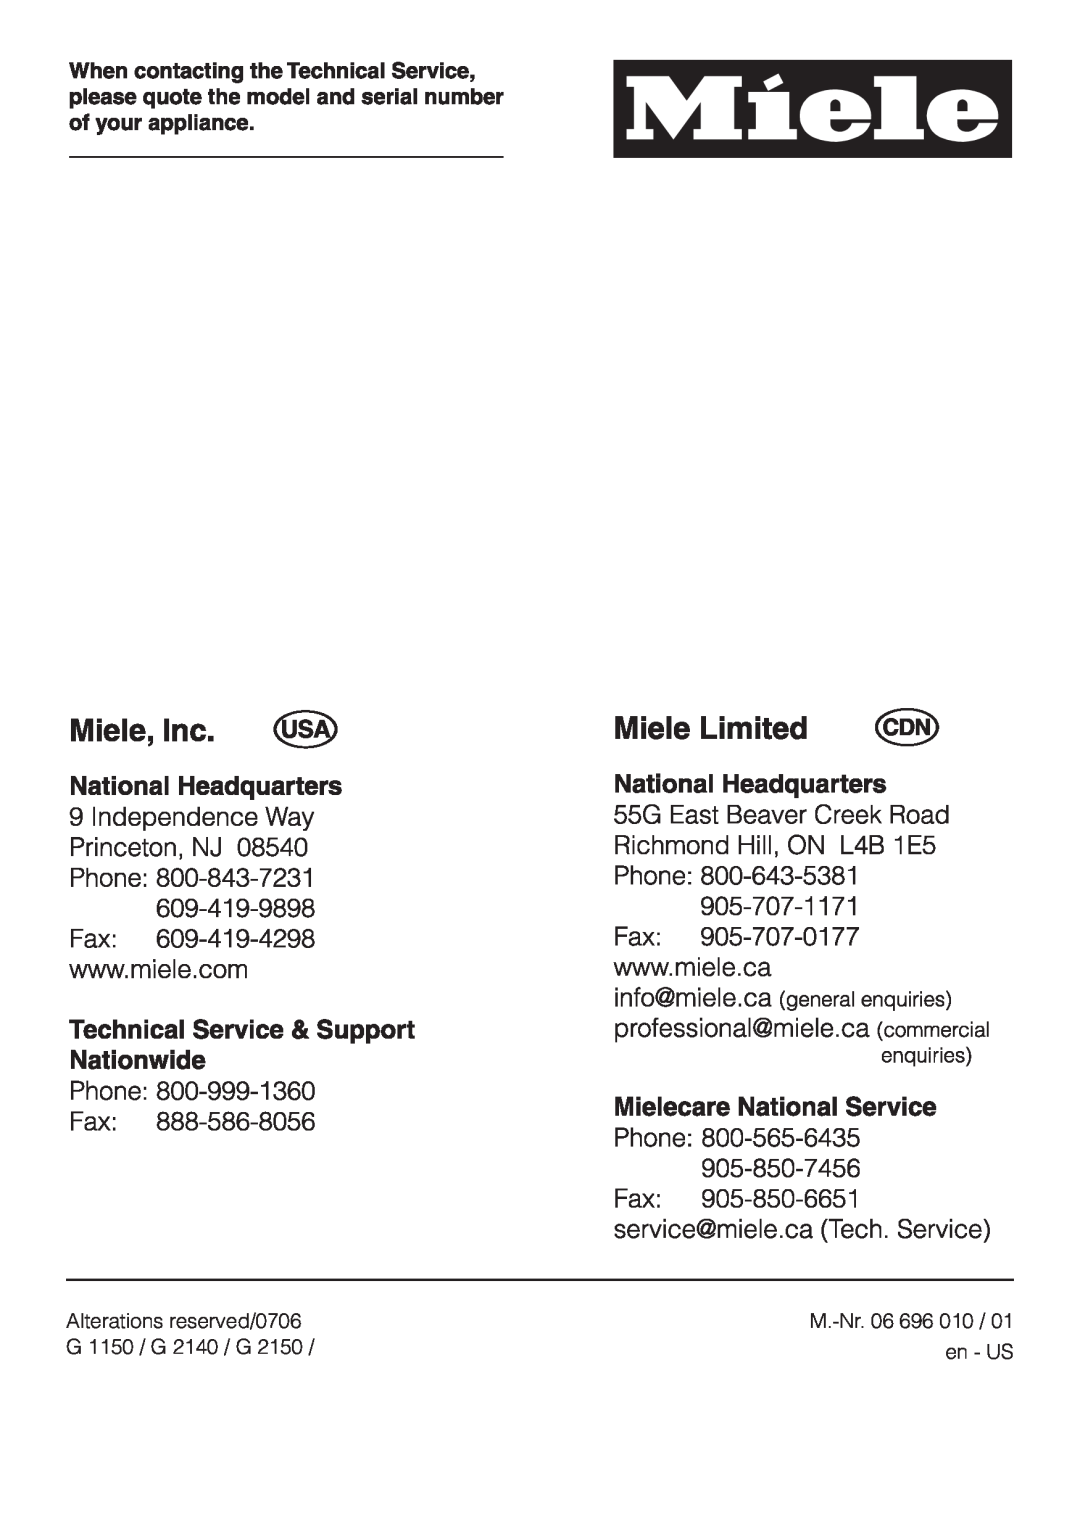 Miele G 2150 operating instructions Alterations reserved/0706, G 1150 / G 2140 / G, en - US, M.-Nr.06 696 010 